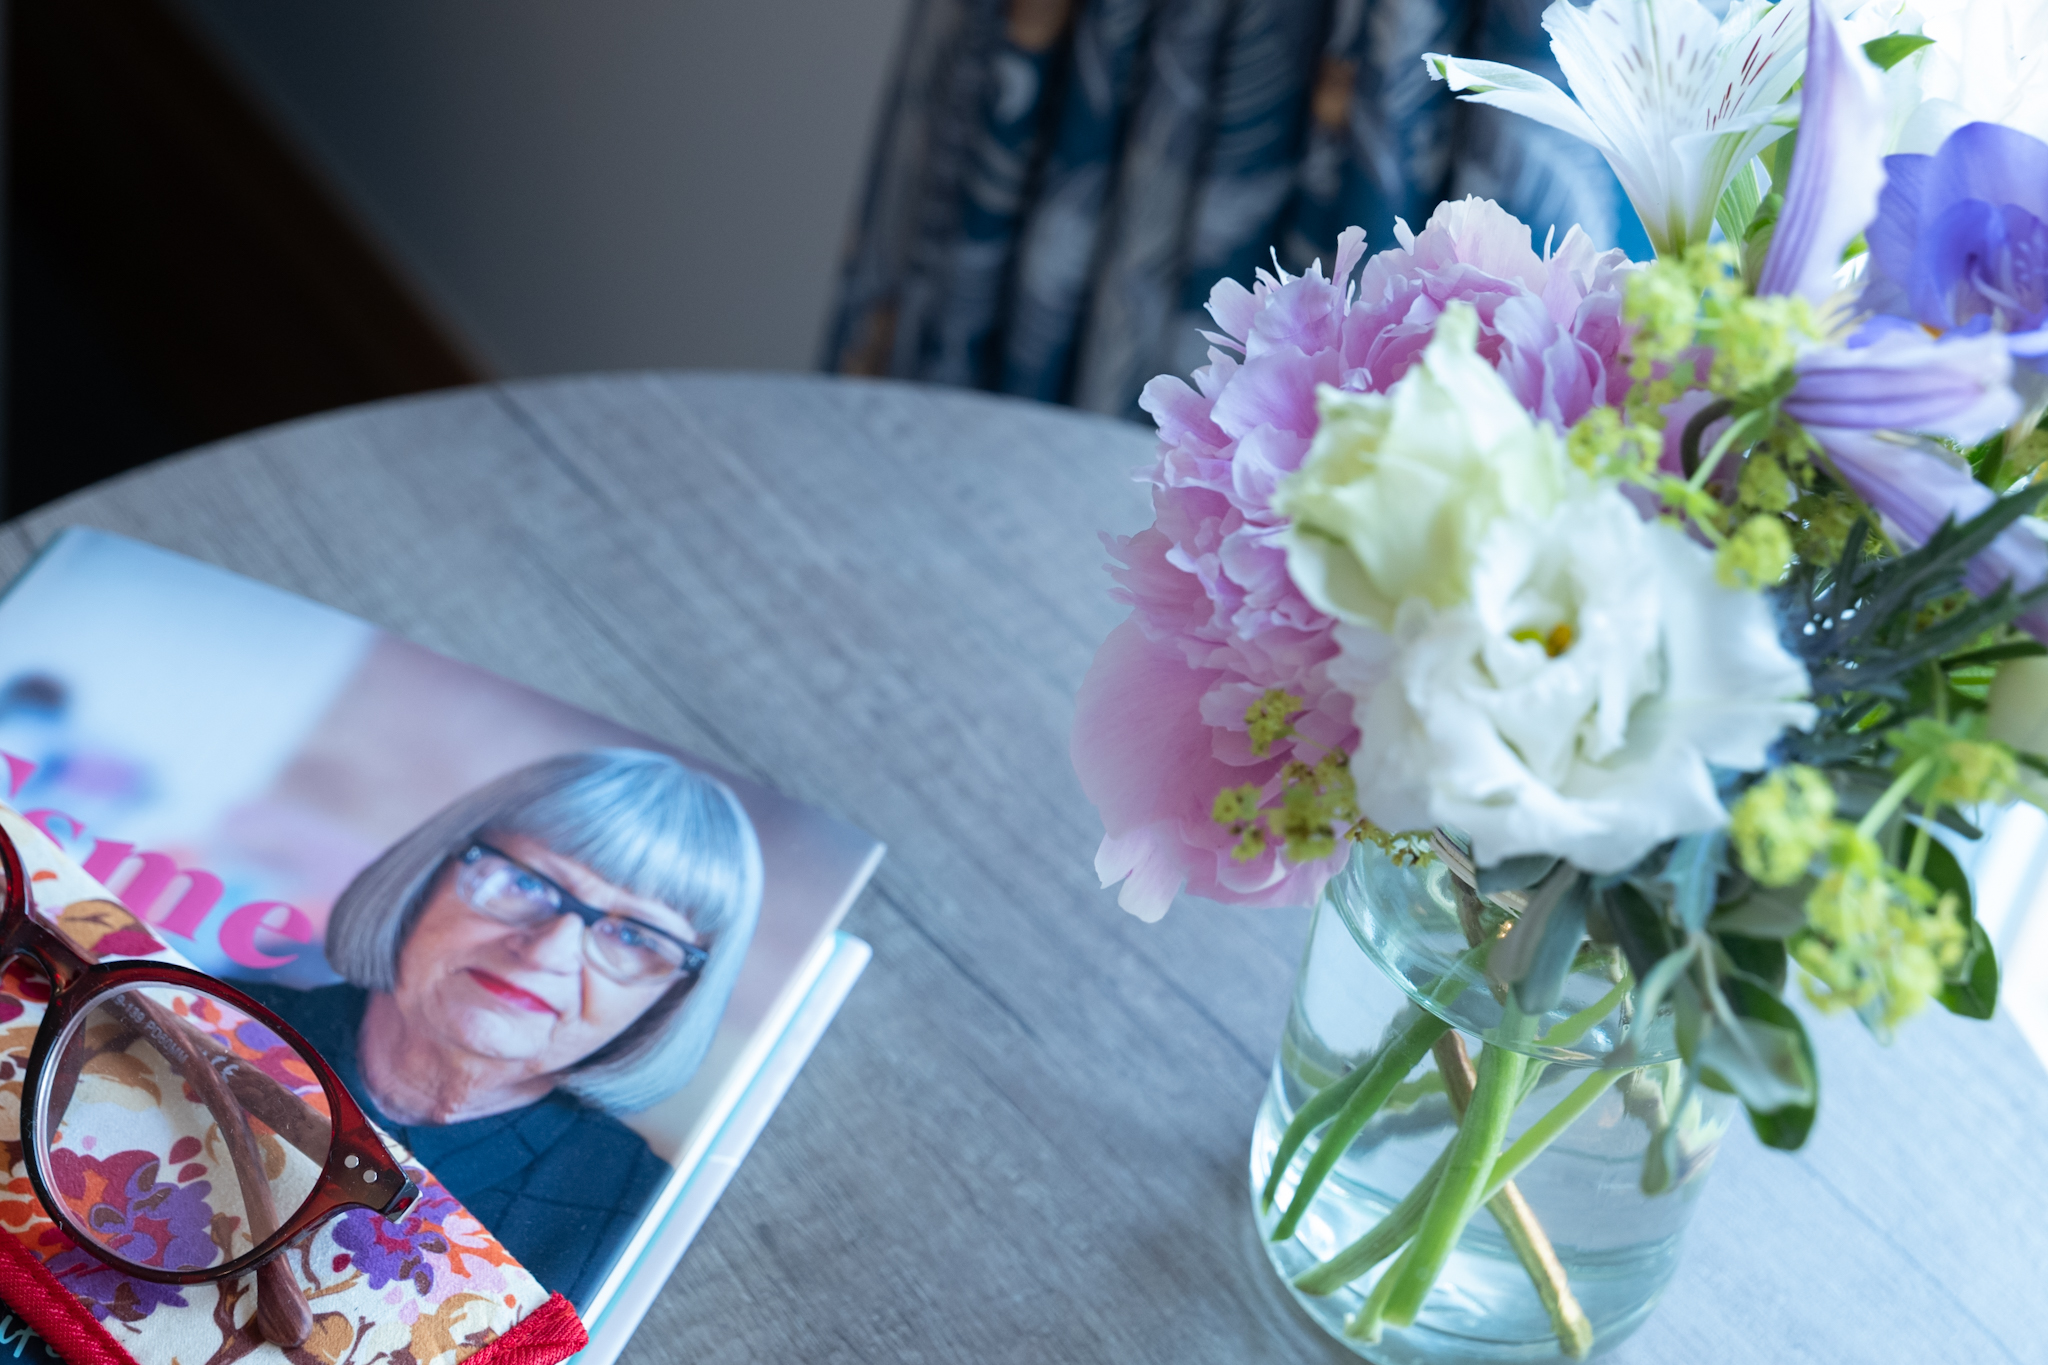 Glasses on Magazine and Flowers